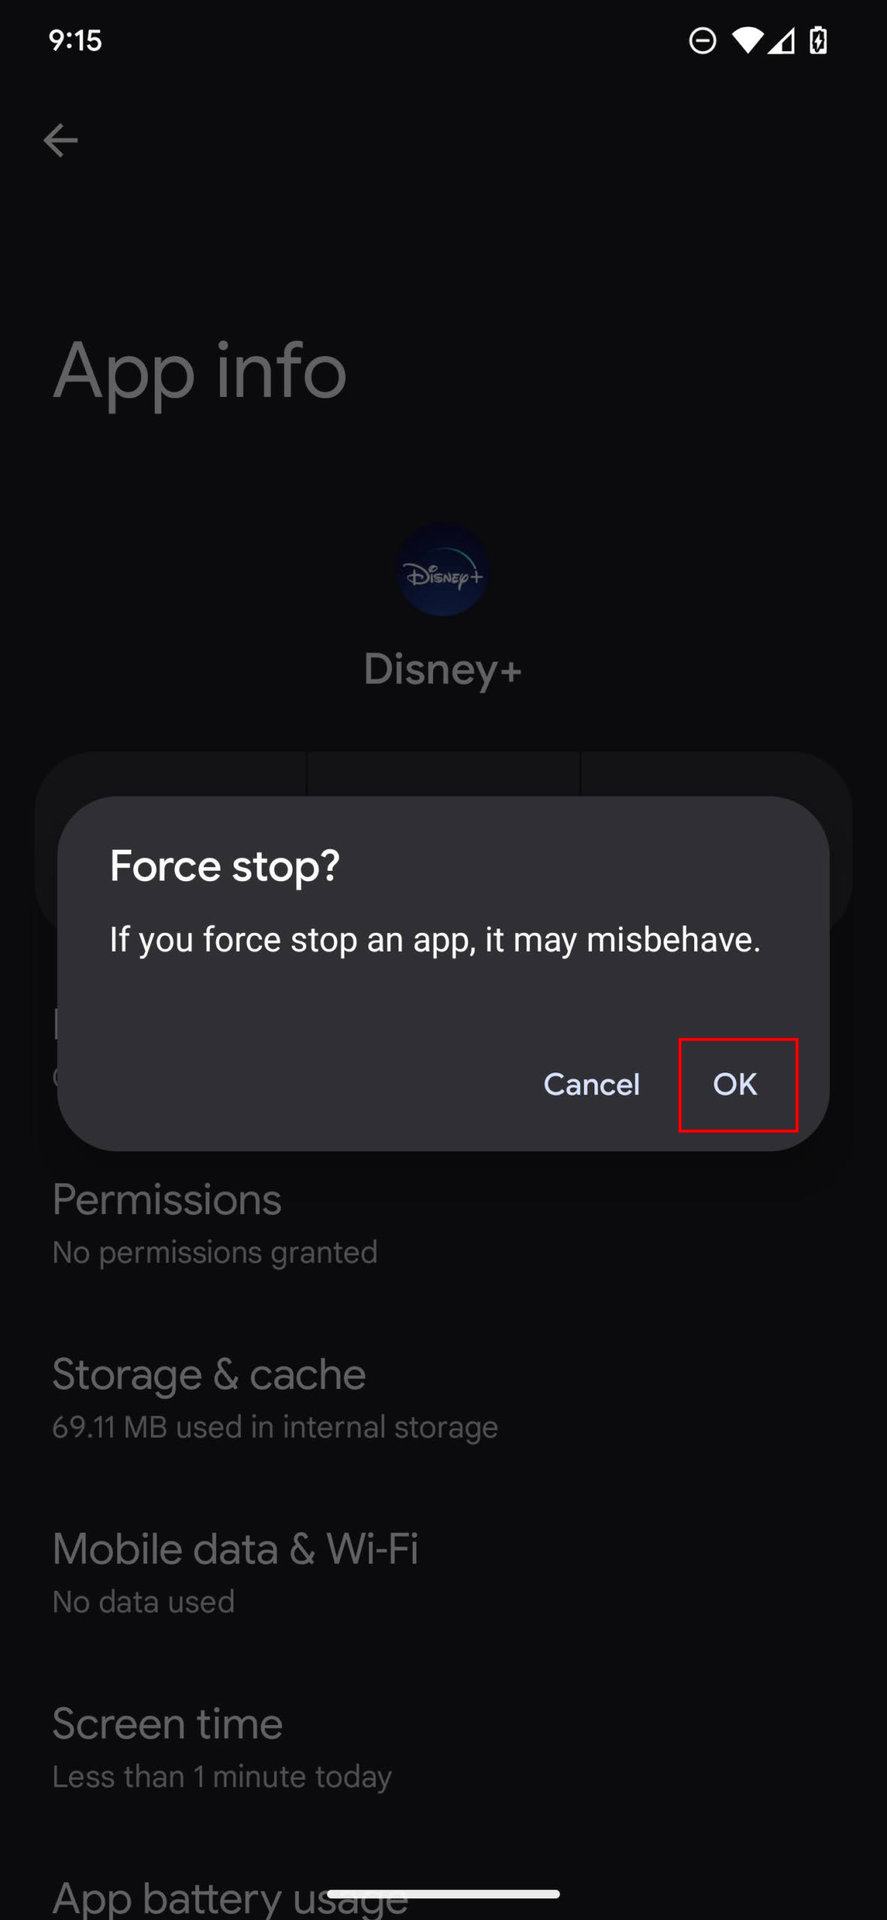 Disney Plus Let's You Disable Background Video. Here's How to Do It.